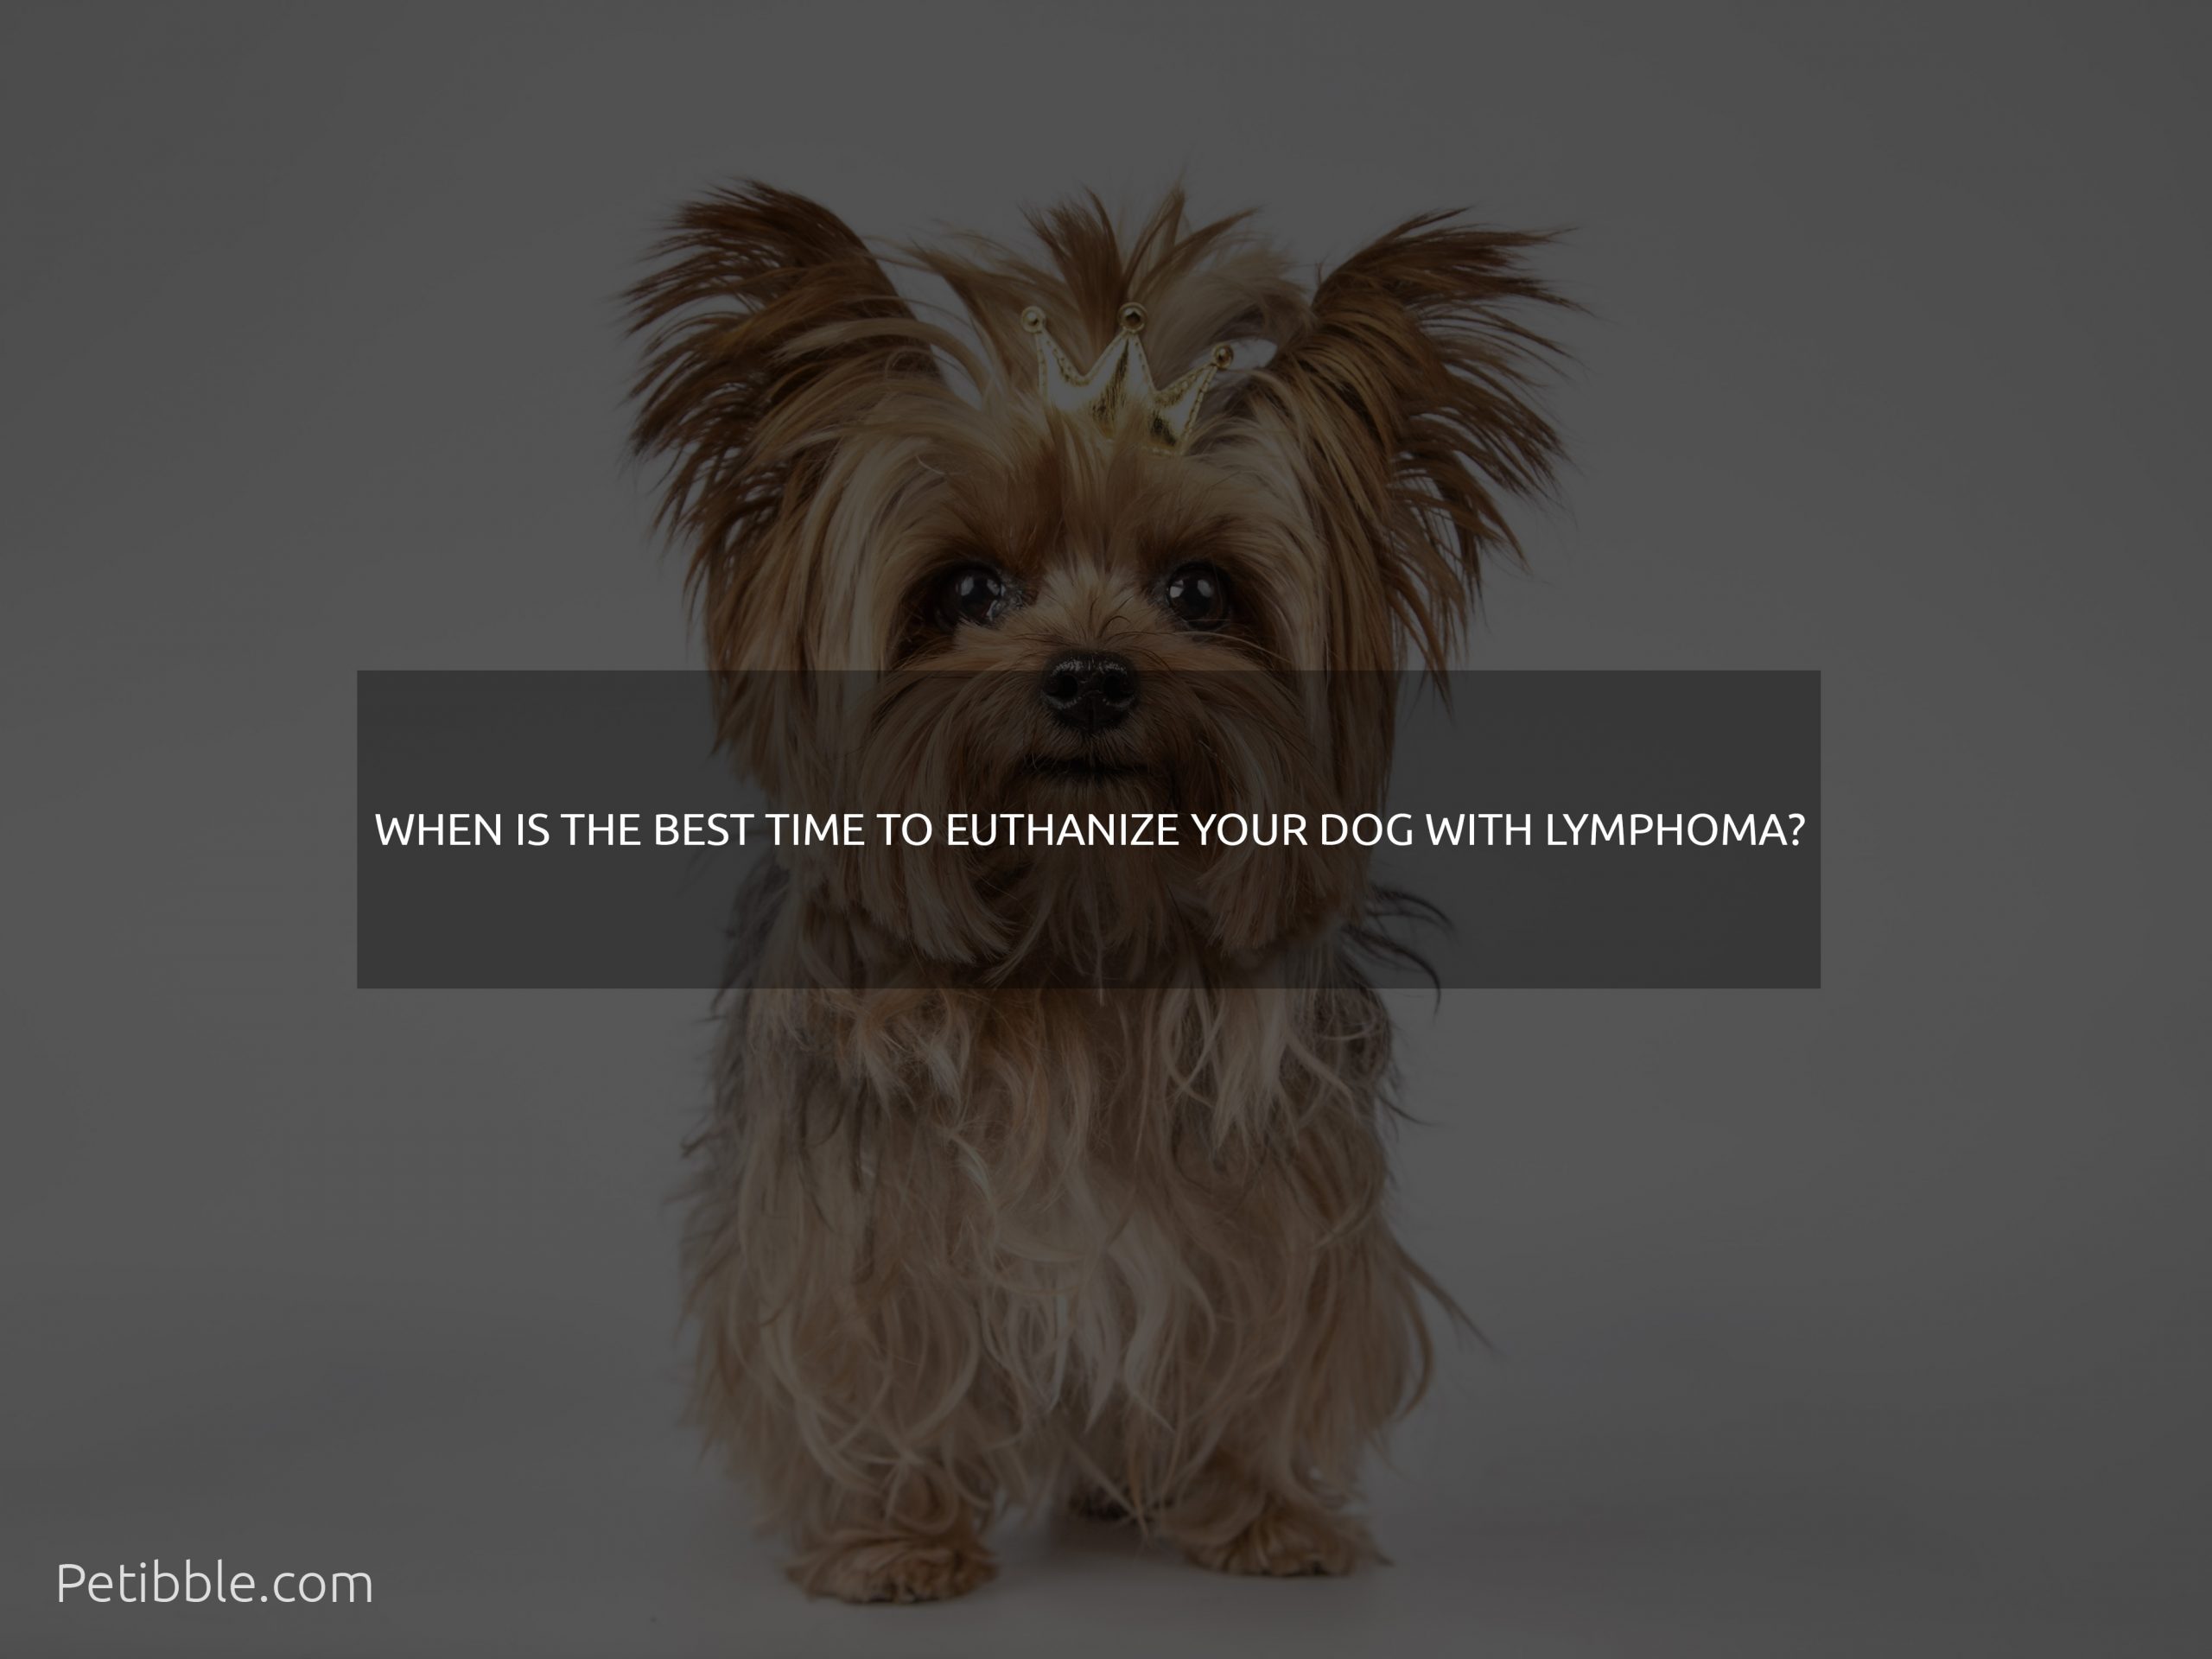 When is the best time to euthanize your dog with lymphoma?